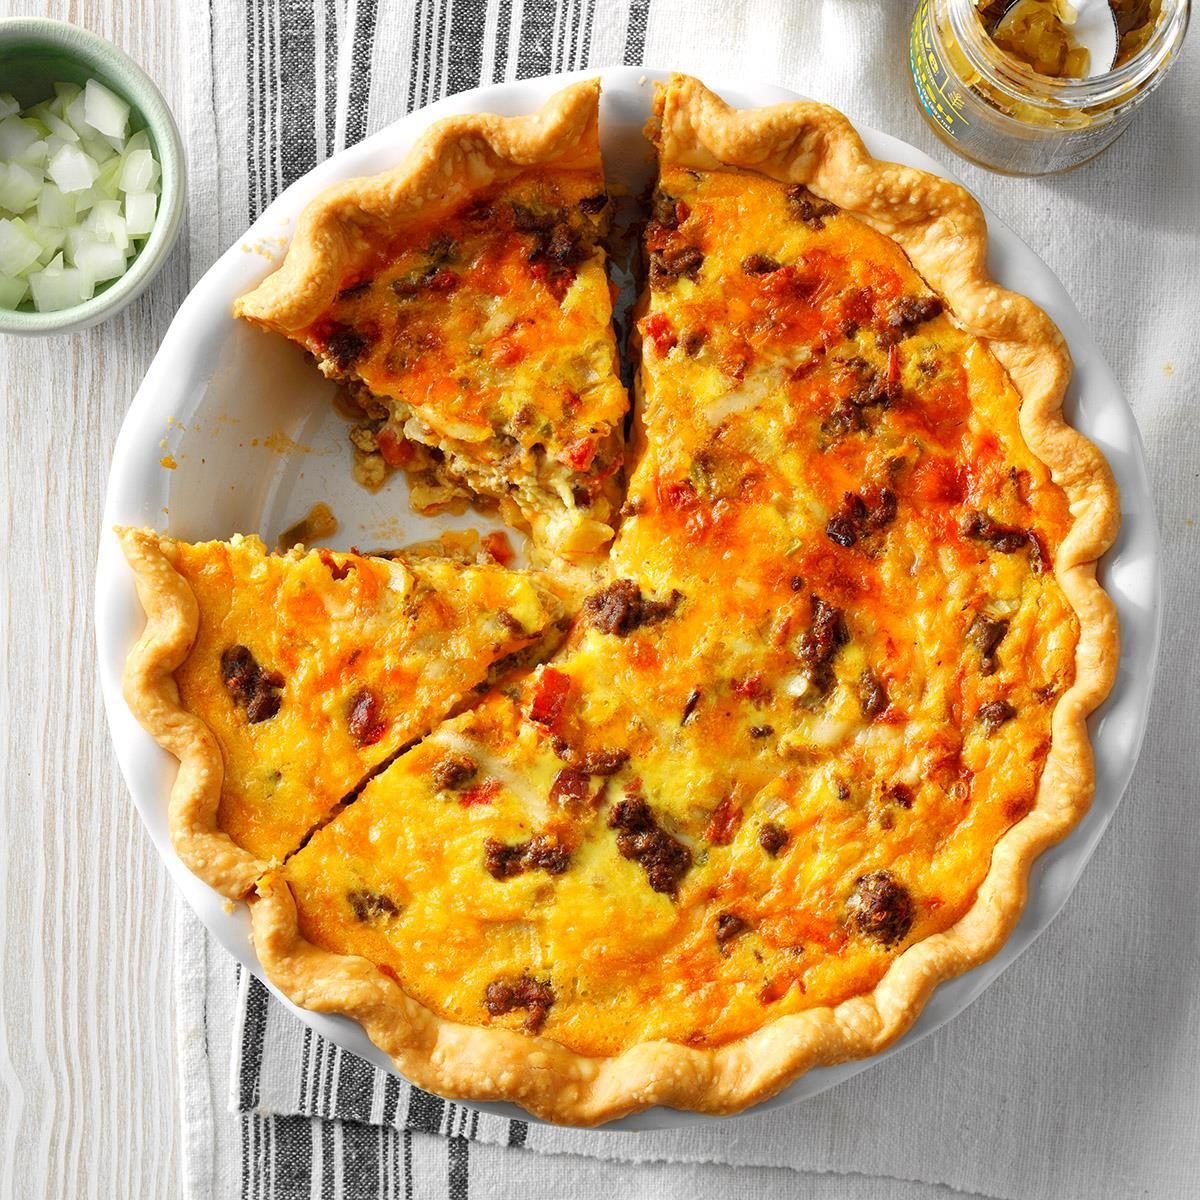 Best Quiche Recipes: Ideas for All Types, Fillings & Flavors